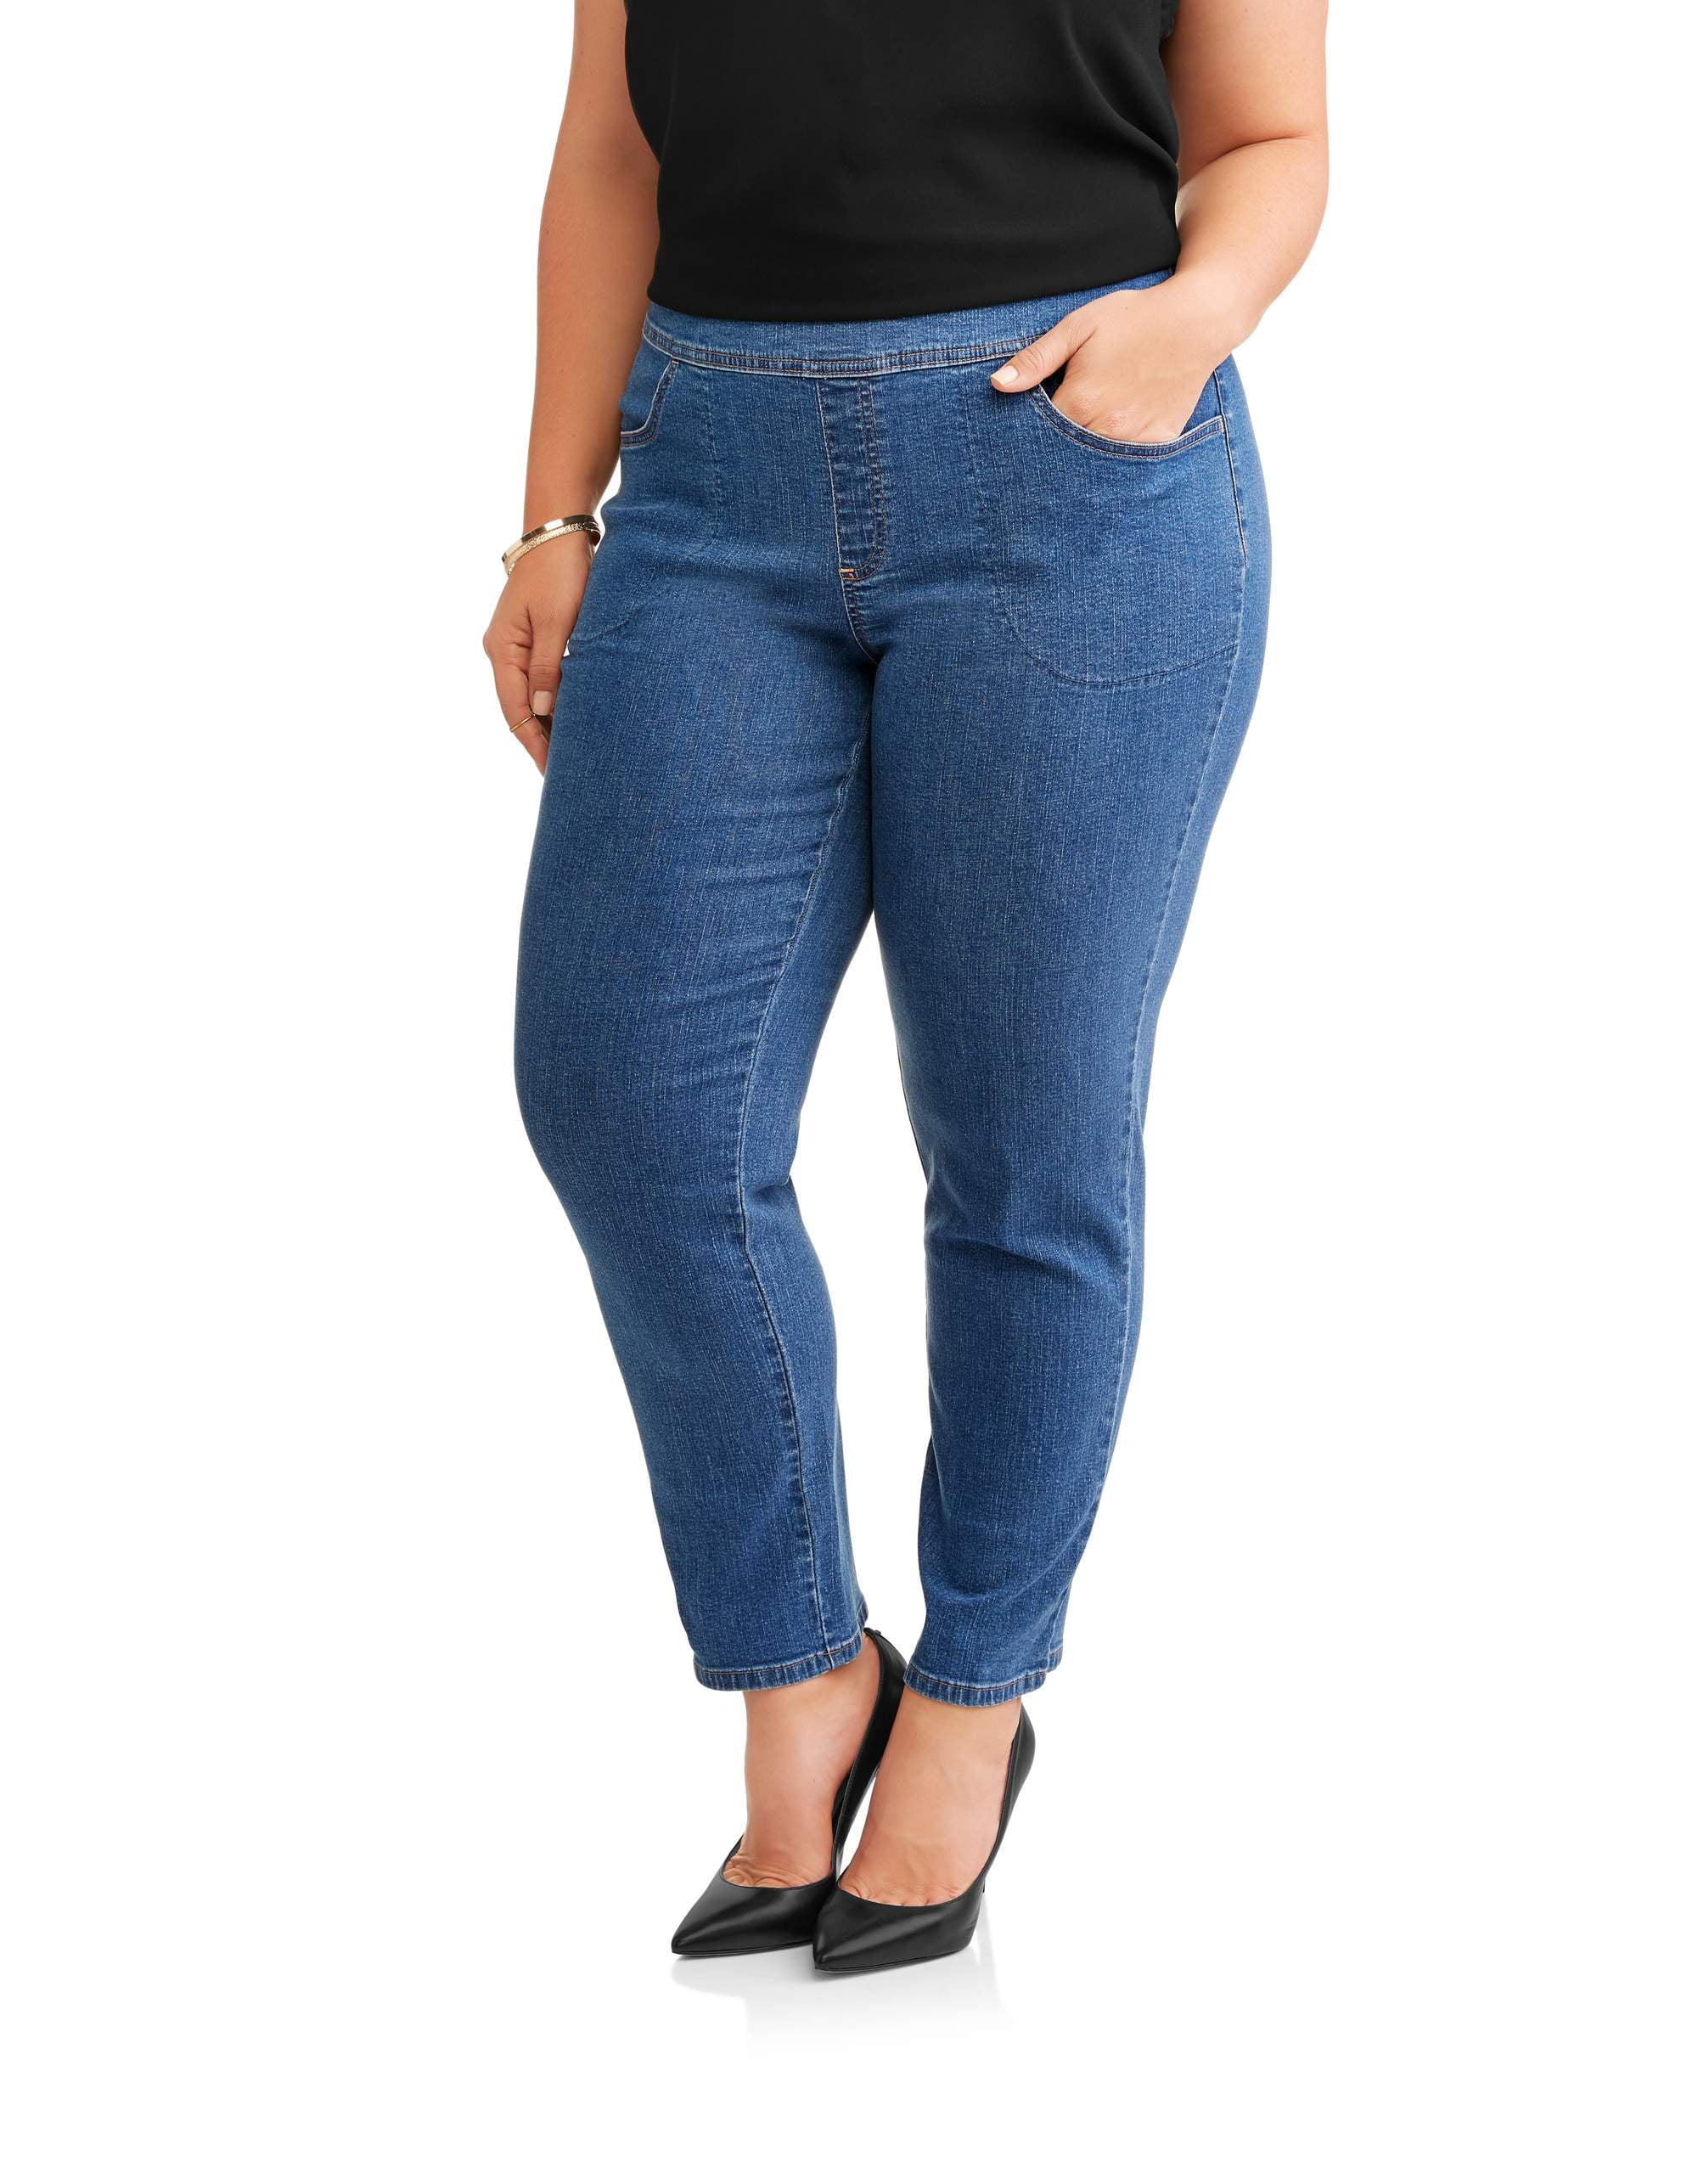 terra and sky plus size jeans